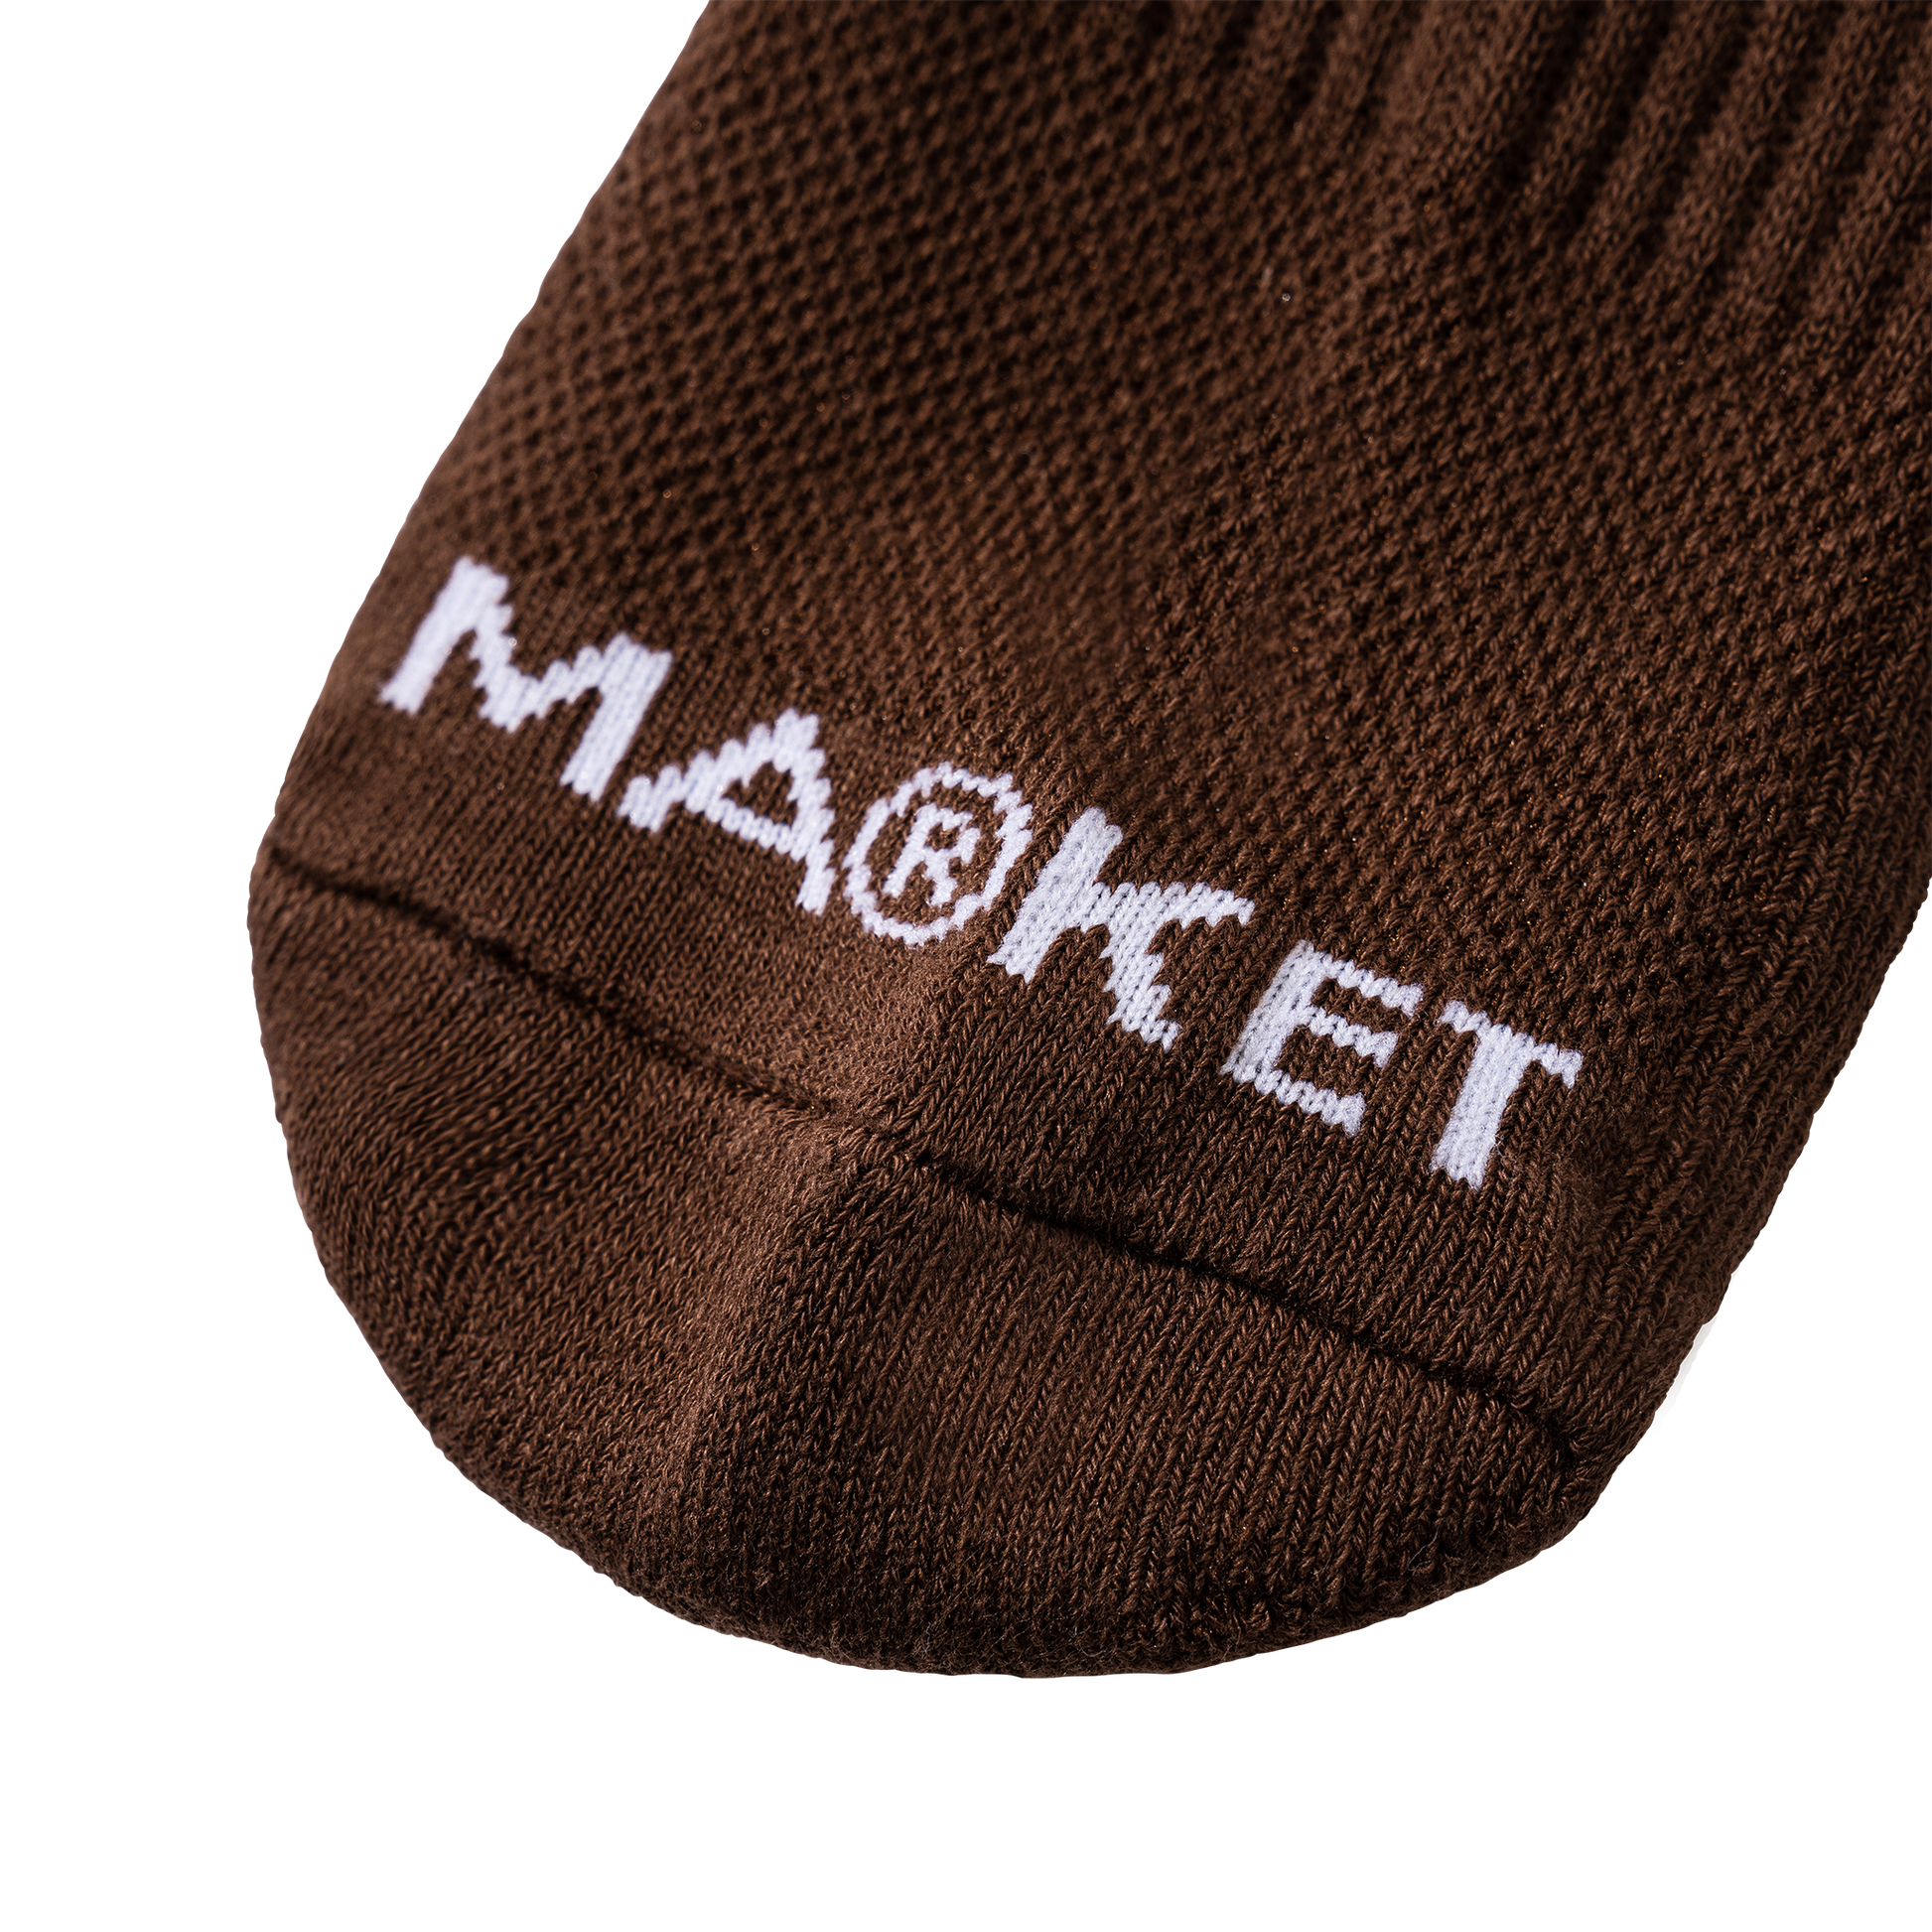 MARKET clothing brand SMILEY UPSIDE DOWN SOCKS. Find more graphic tees, socks, hats and small goods at MarketStudios.com. Formally Chinatown Market.